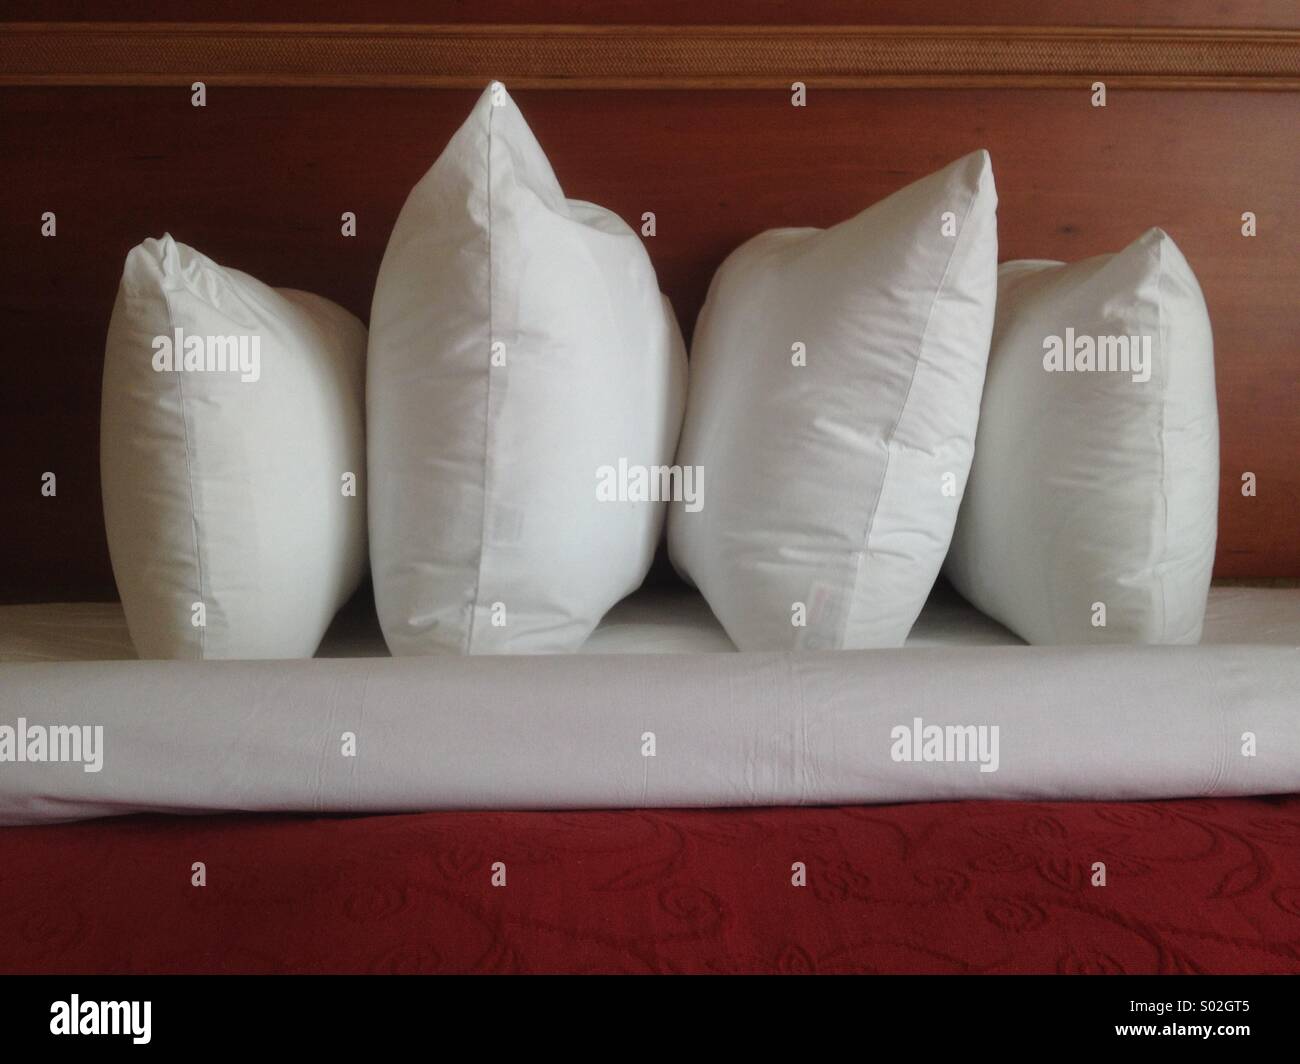 Hospitality in bed: Four pillows by wooden baseboard in window light Stock Photo